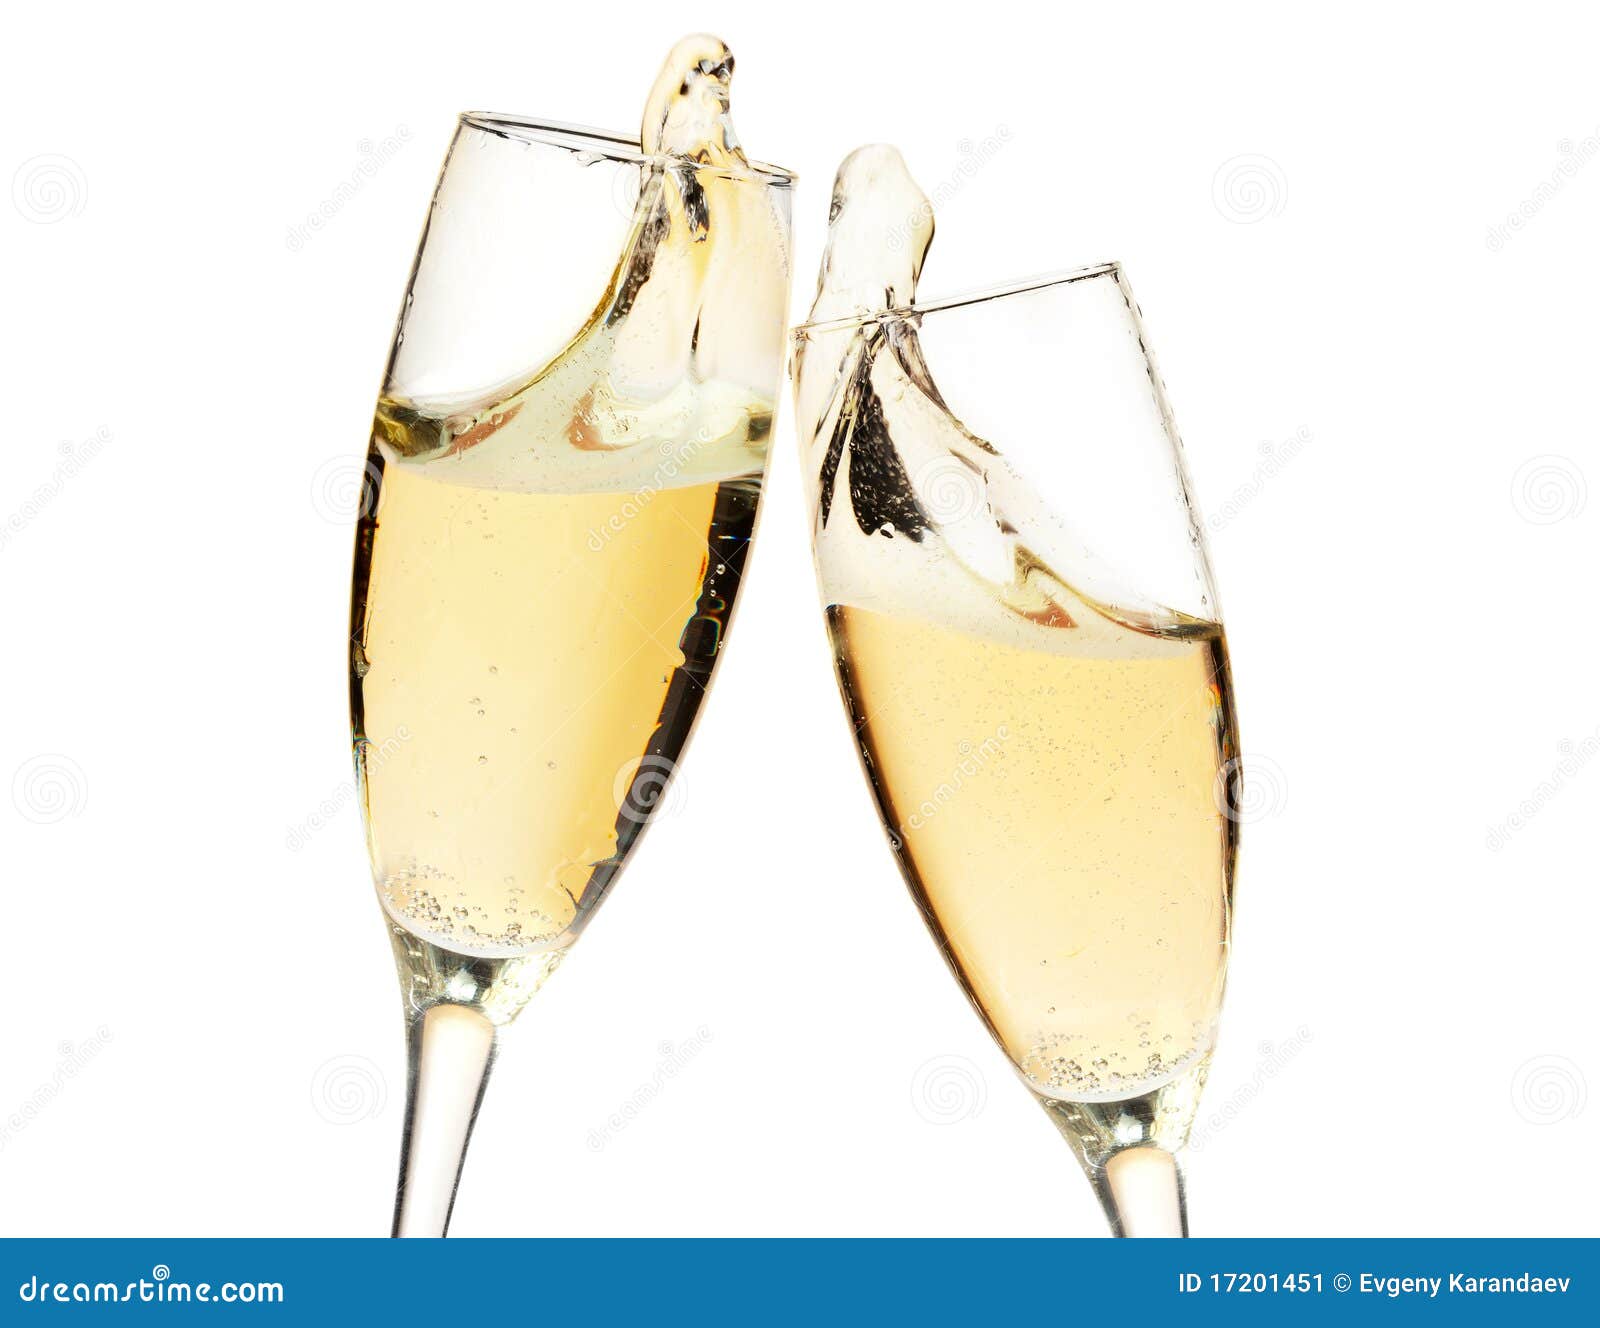 https://thumbs.dreamstime.com/z/cheers-two-champagne-glasses-17201451.jpg